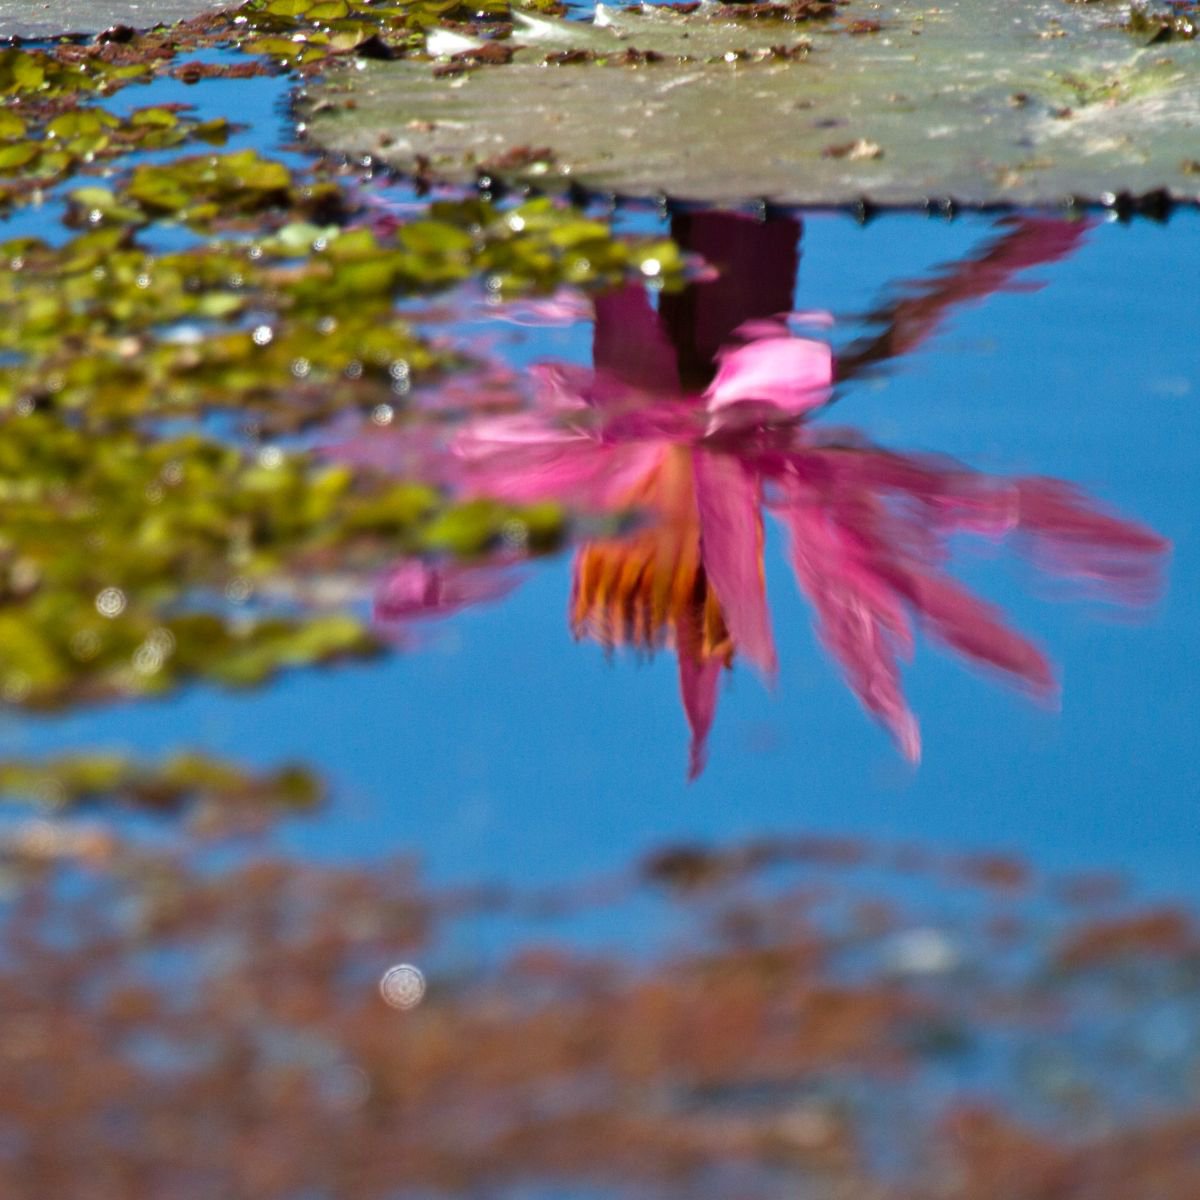 Reflecting on the beauty of a water lily, Port Douglas, Queensland, Australia by MBK Wildlife Photography